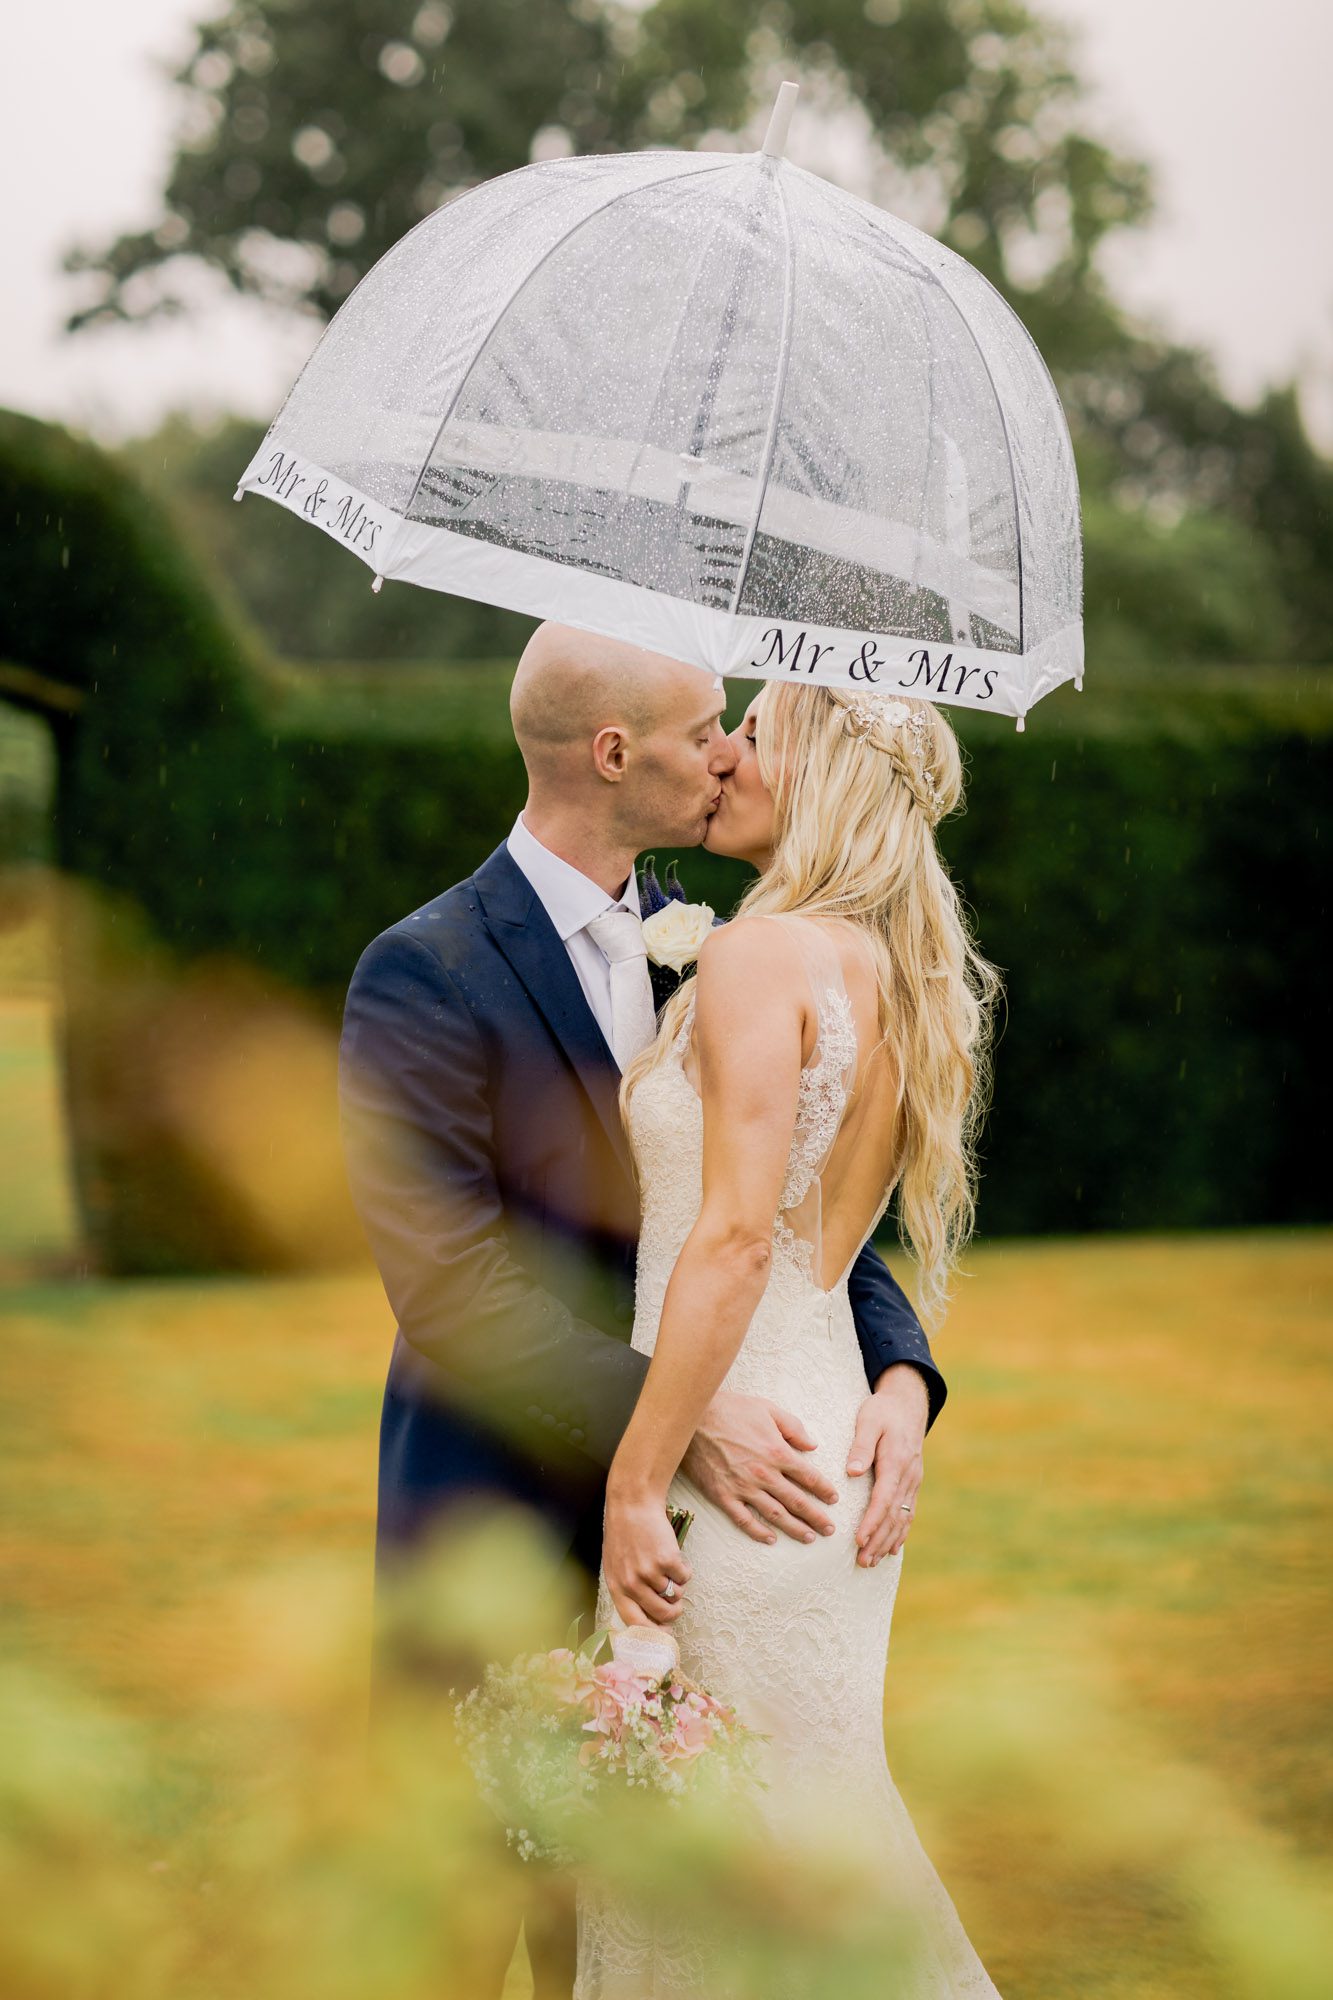 Bride and groom kiss on their wedding day under an umbrella at Barnett Hill in Surrey.